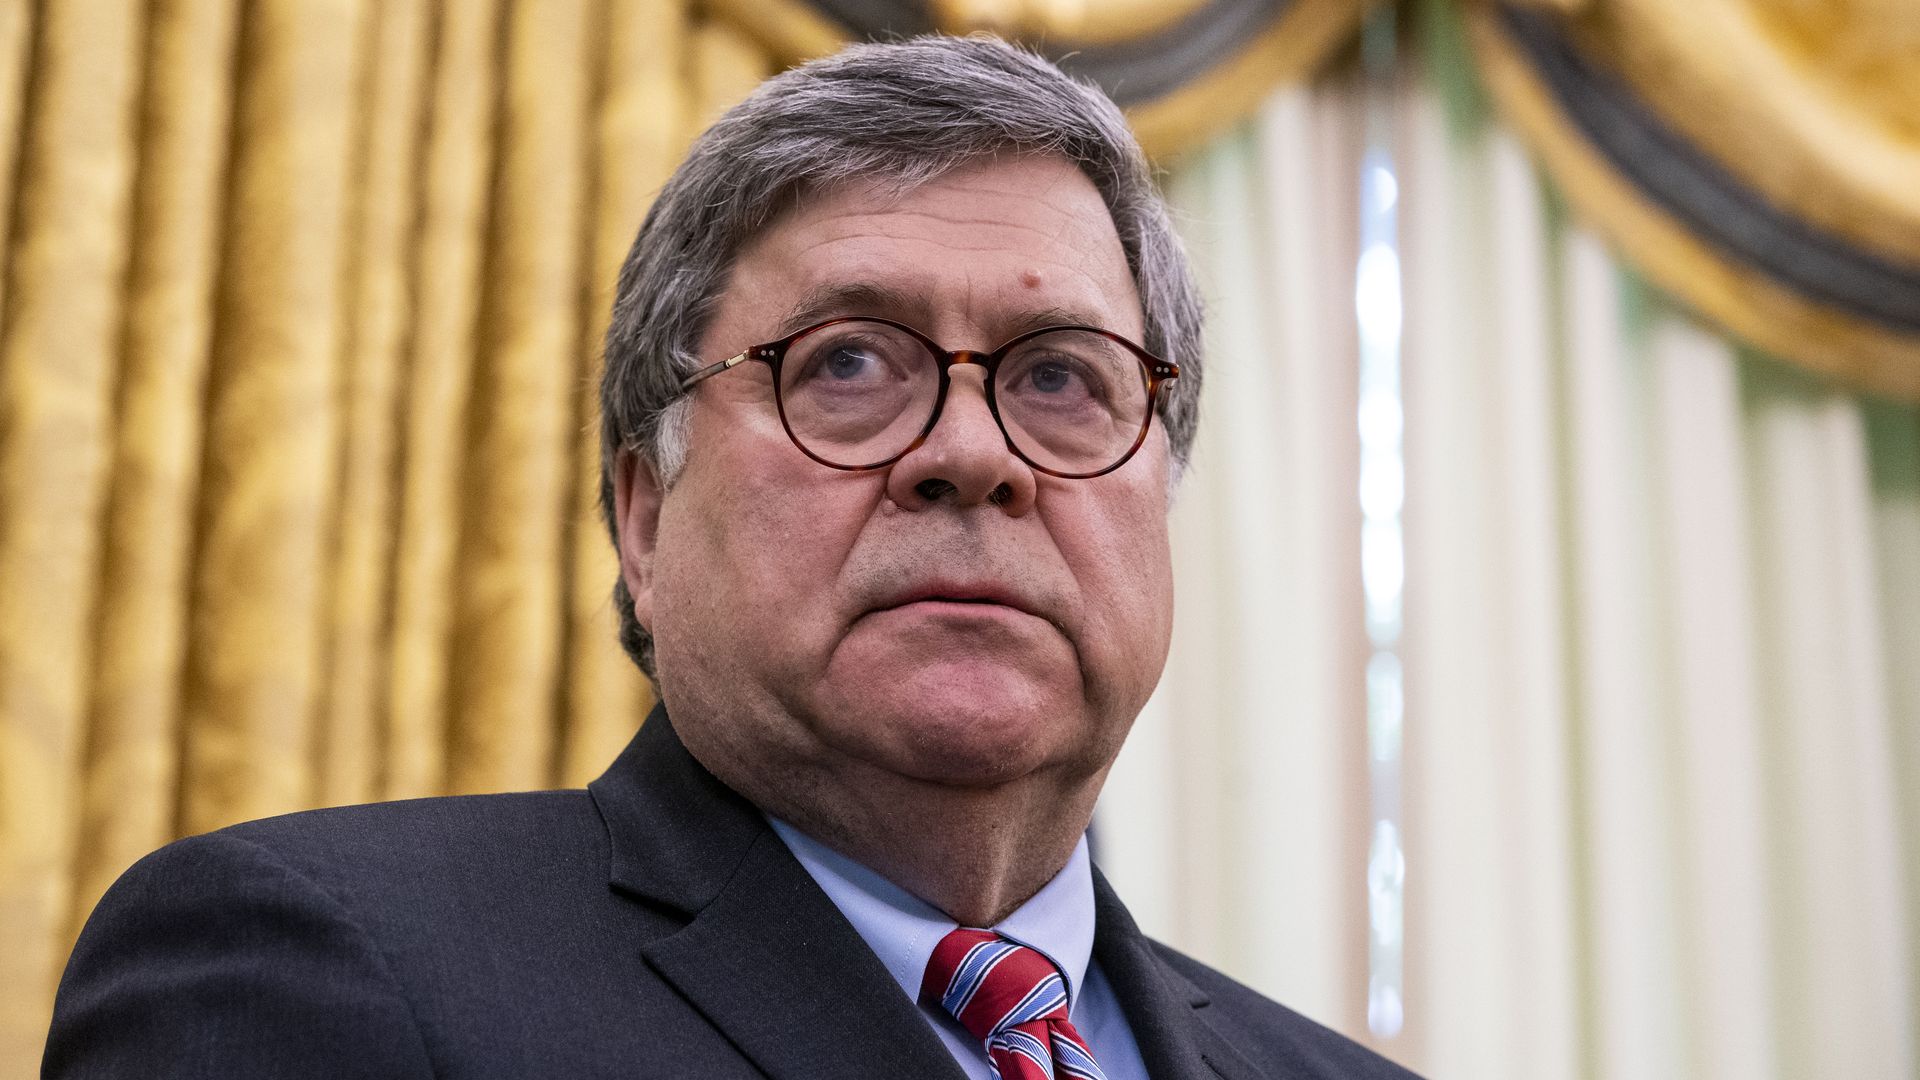 Bill Barr stands in this image